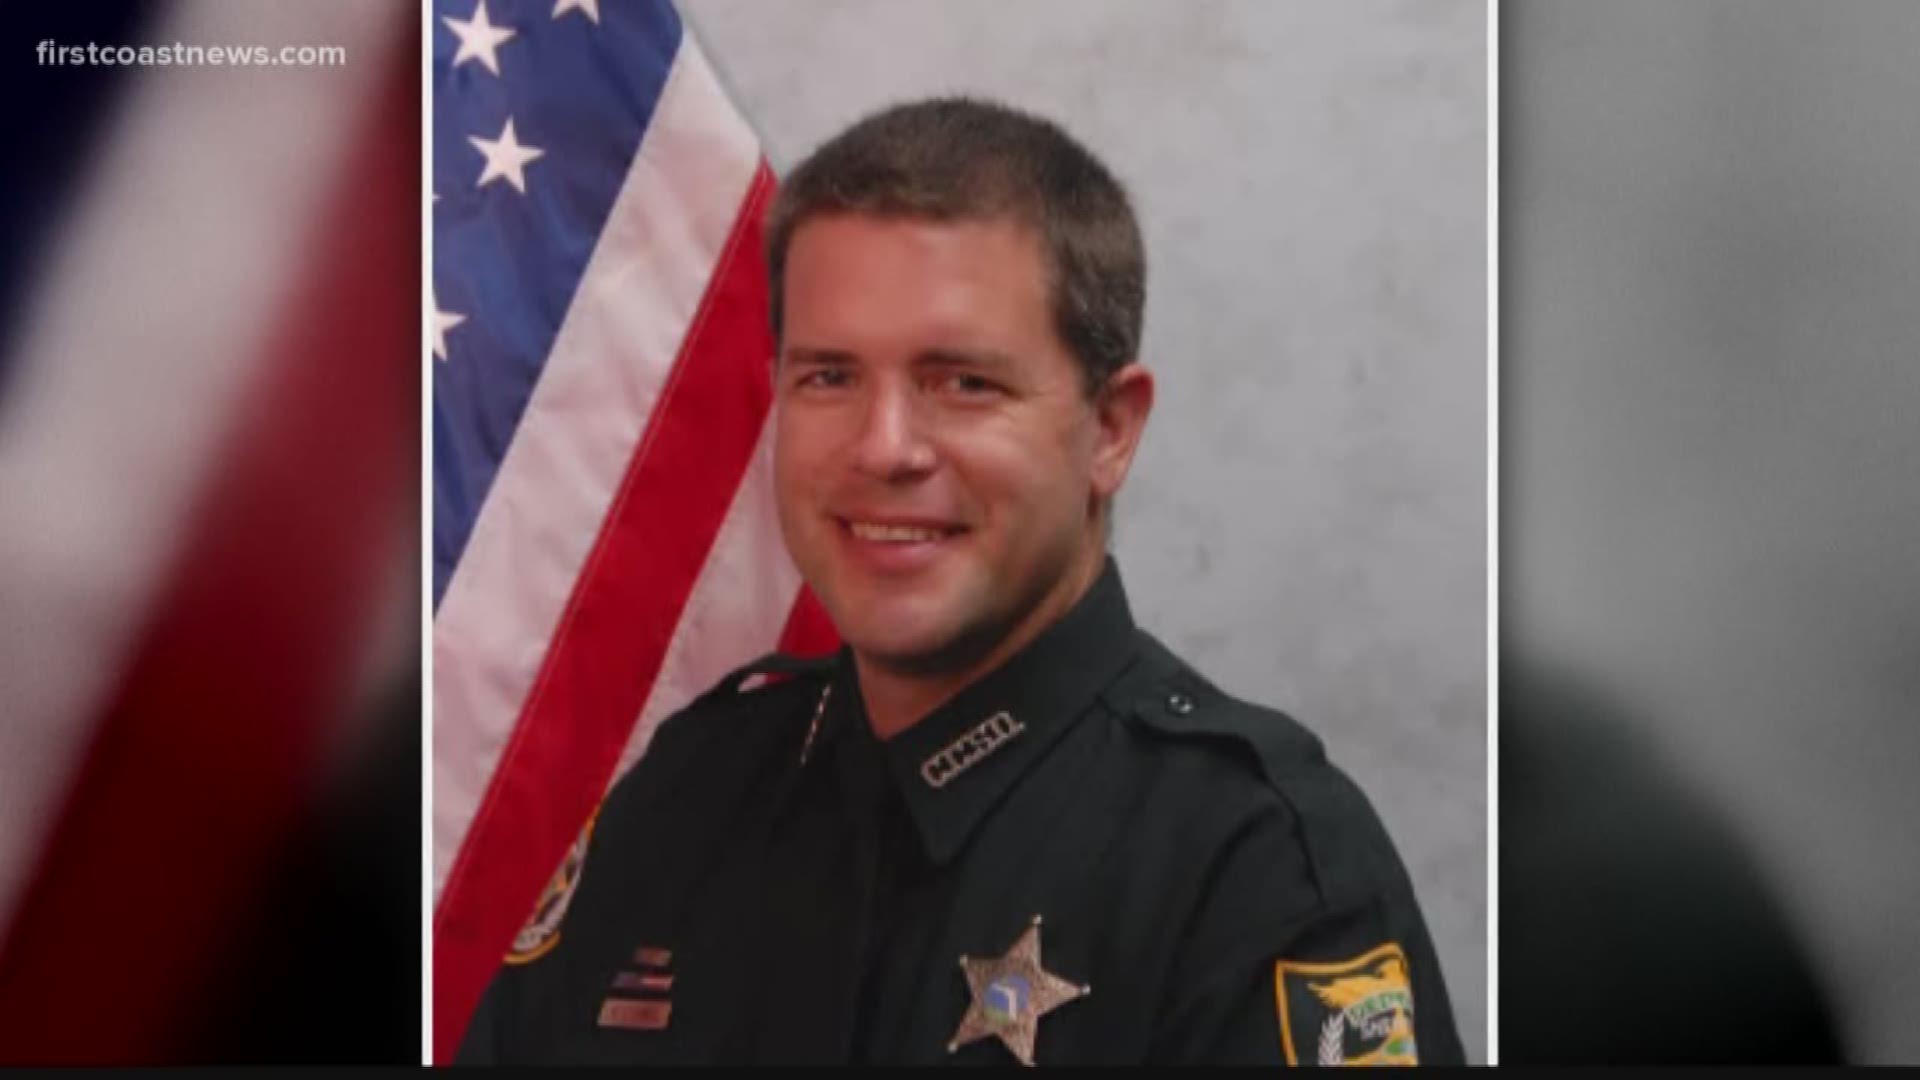 Deputy Zirbel was hit and killed while riding his motorcycle on duty in August.